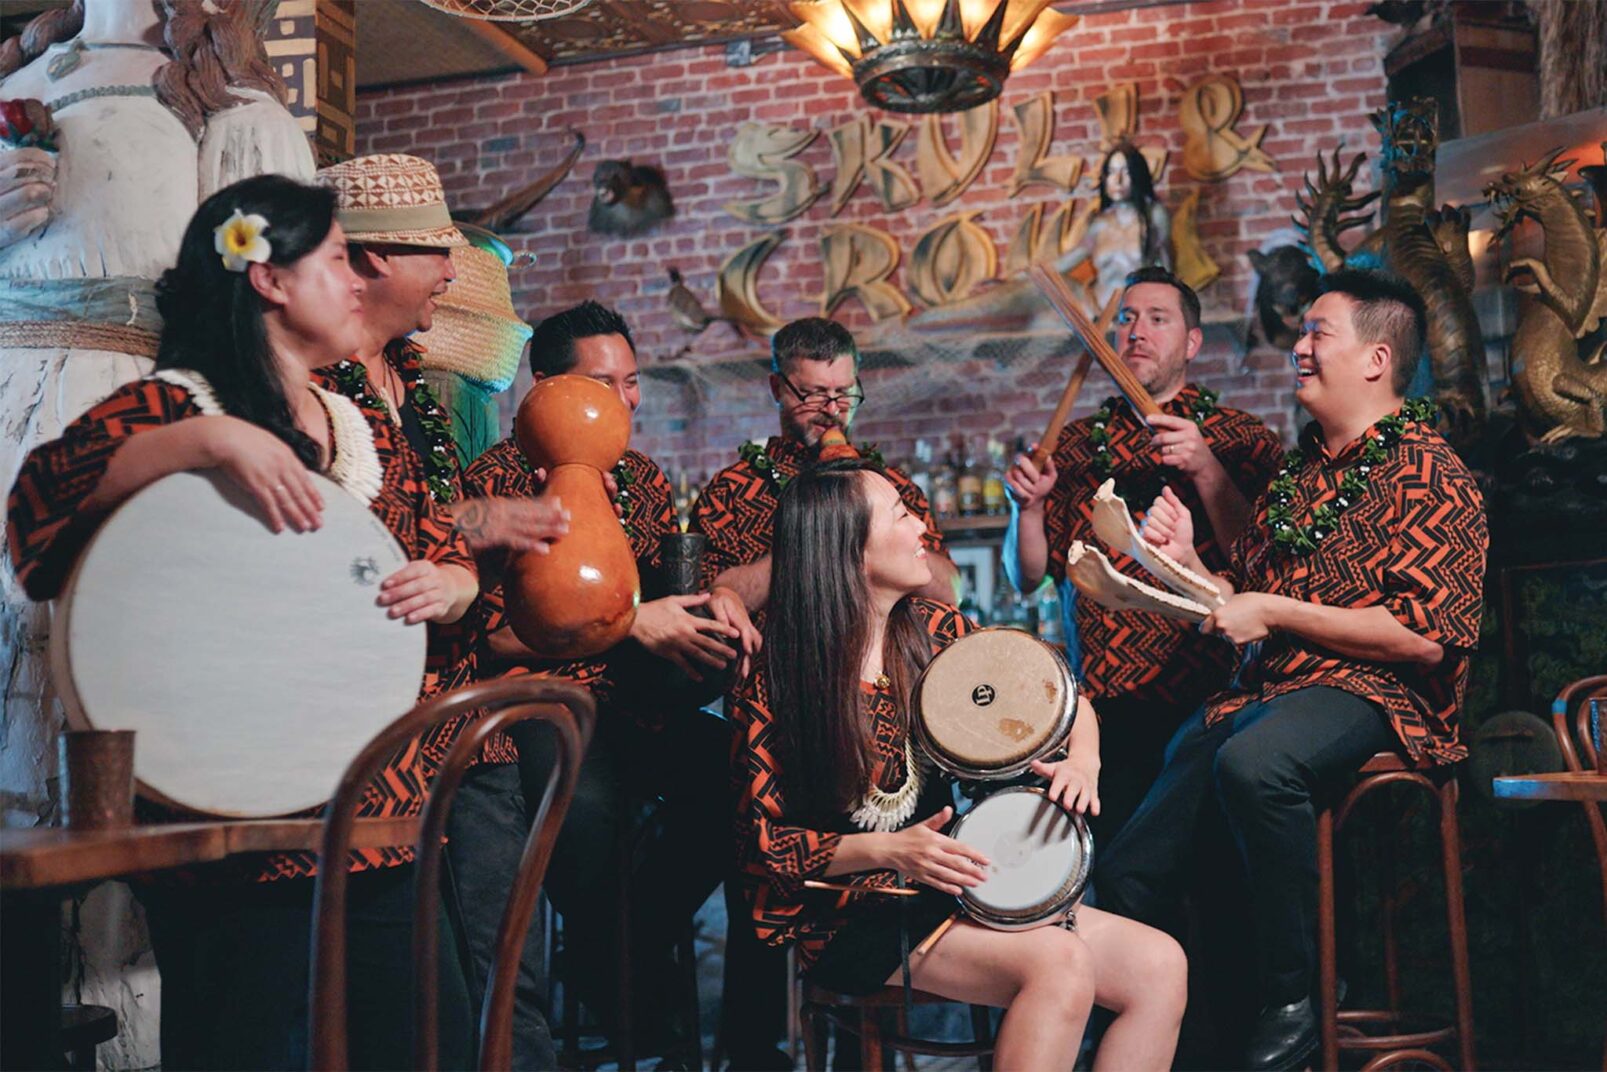 A group of musicians wearing matching traditional patterned shirts is performing with various instruments in a room with eclectic decor, including a sign that reads "SKULL CROWN" and various sculptures on the walls.